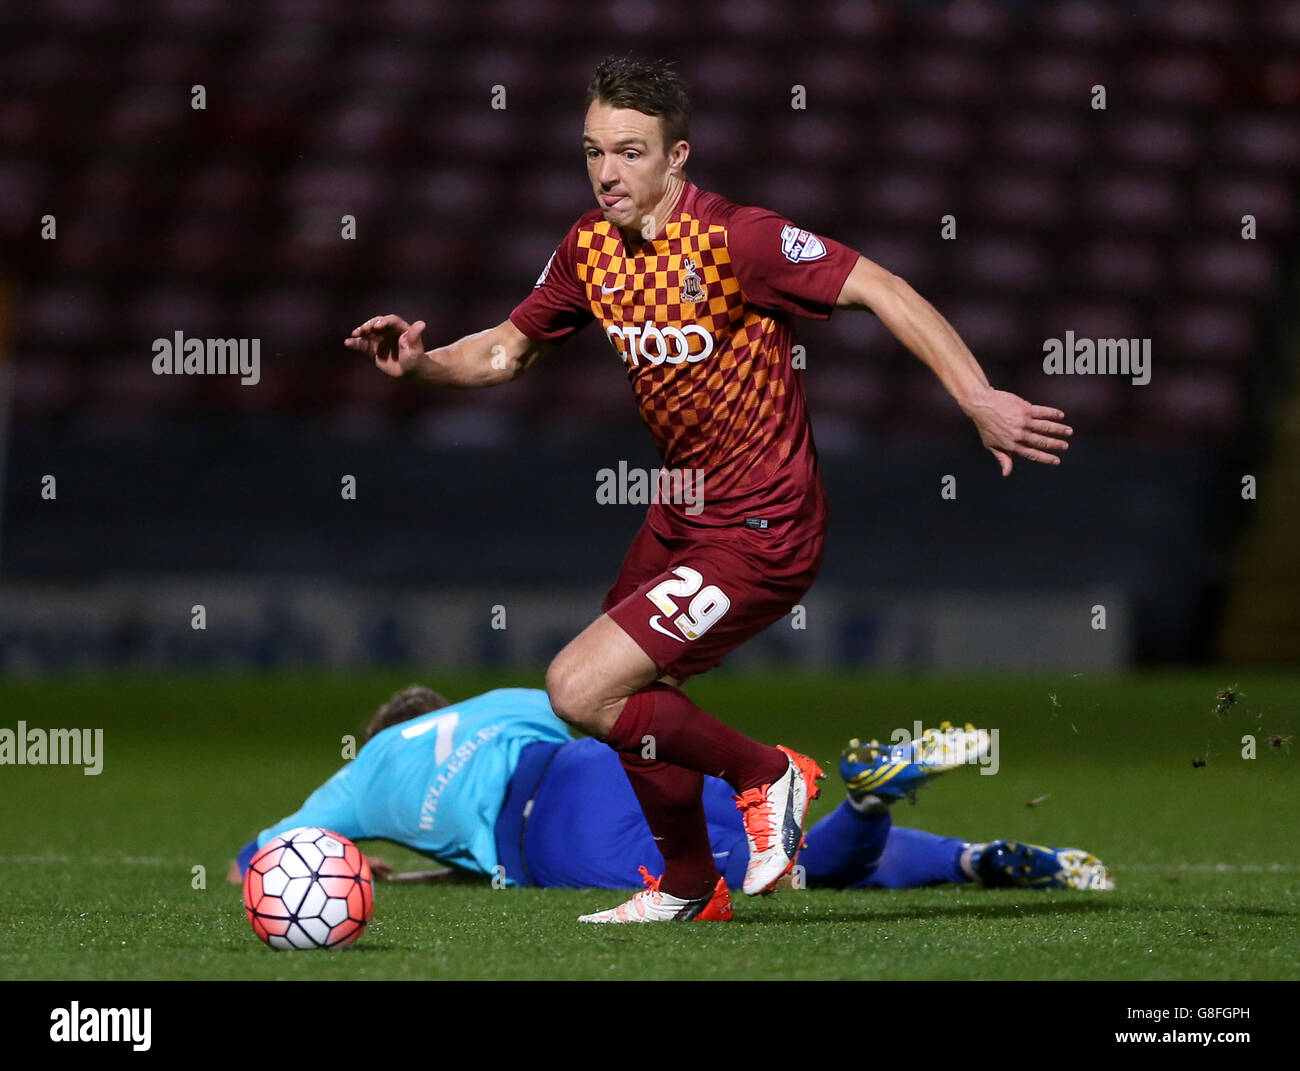 Bradford City's Tony McMahon tackles Aldershot Town's Sam Hatton during the Emirates FA Cup first round replay match at Valley Parade, Bradford. Stock Photo